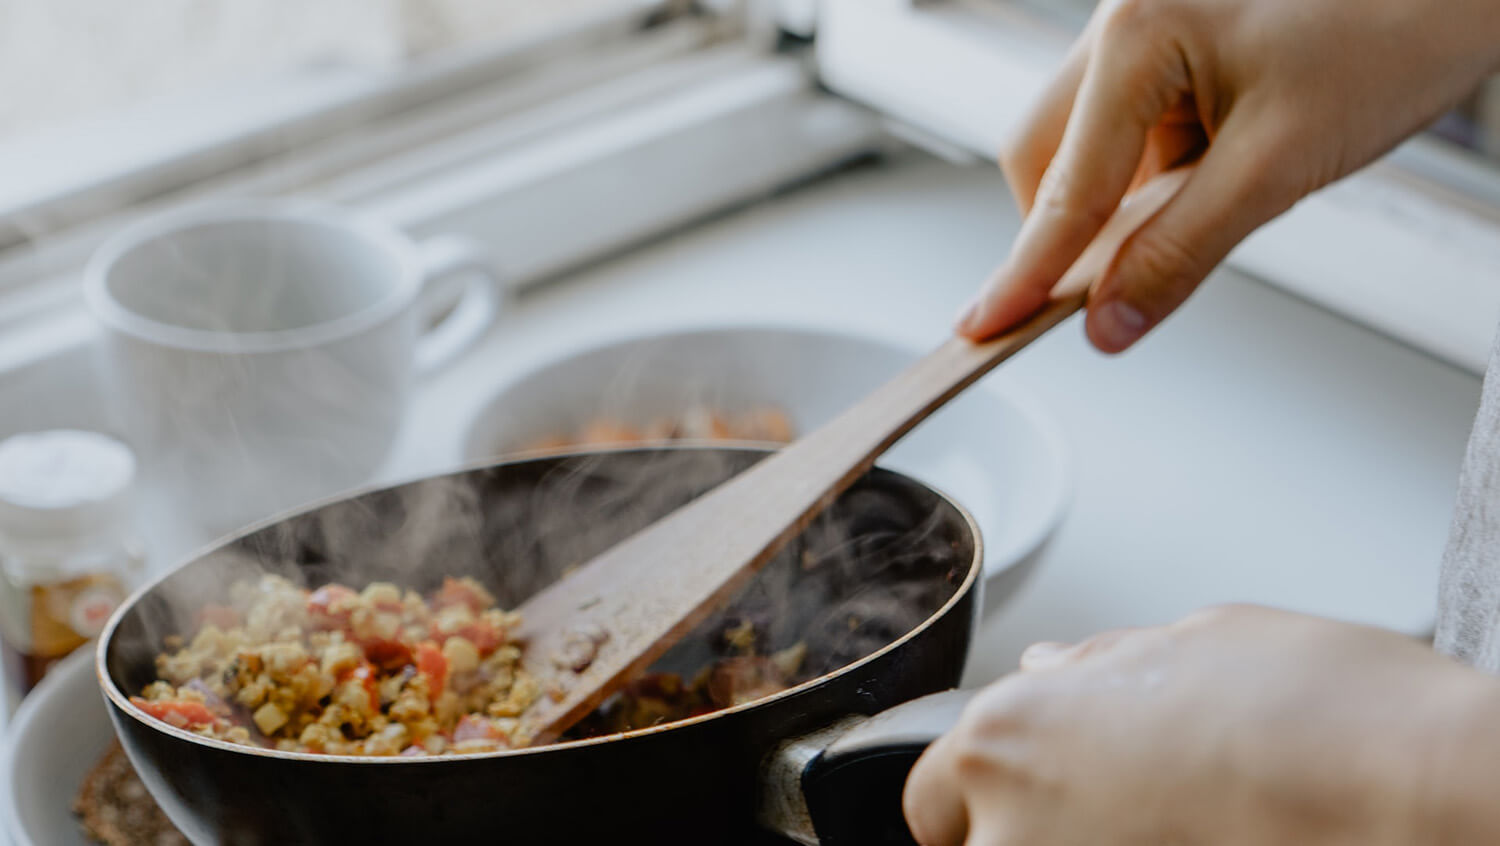 Close up of hands dishing up a hot meal from a frying pan